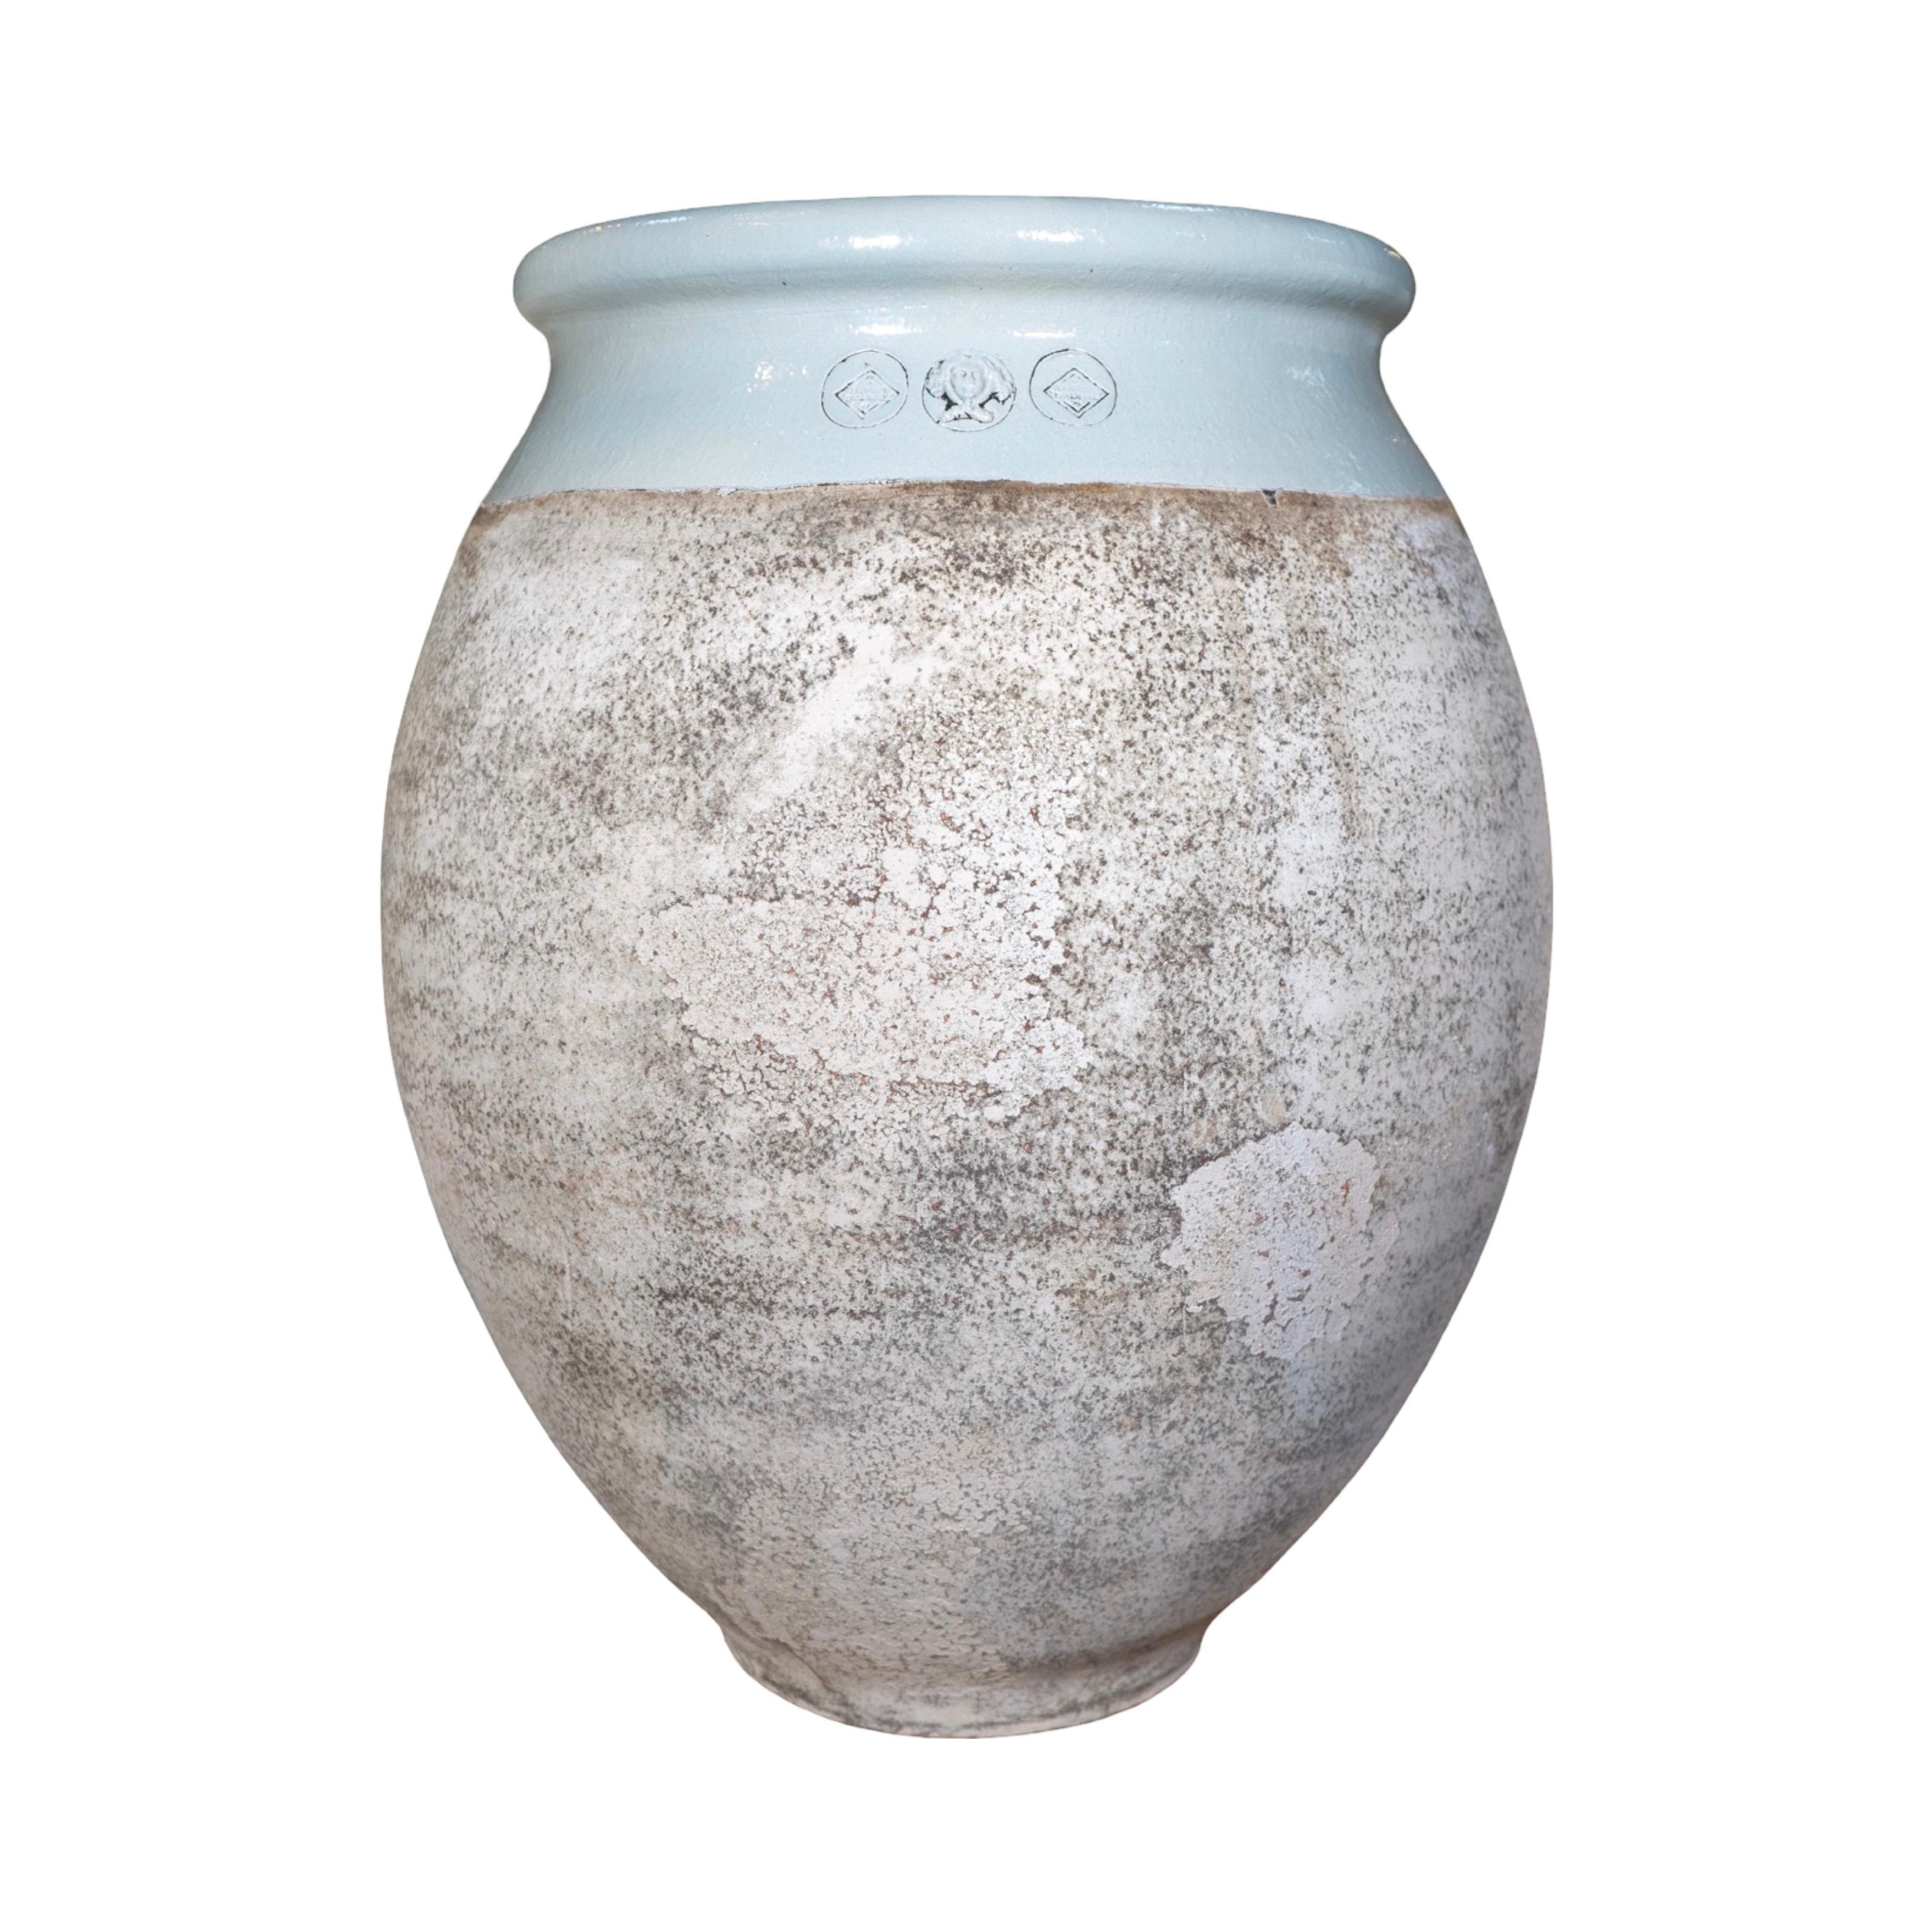 This French Terracotta Glazed Planter is a contemporary piece, handmade in France, with a unique glazed baby blue finish and a textured surface for a beautifully aged look. Crafted from genuine terracotta, it features a carved medusa motif in the